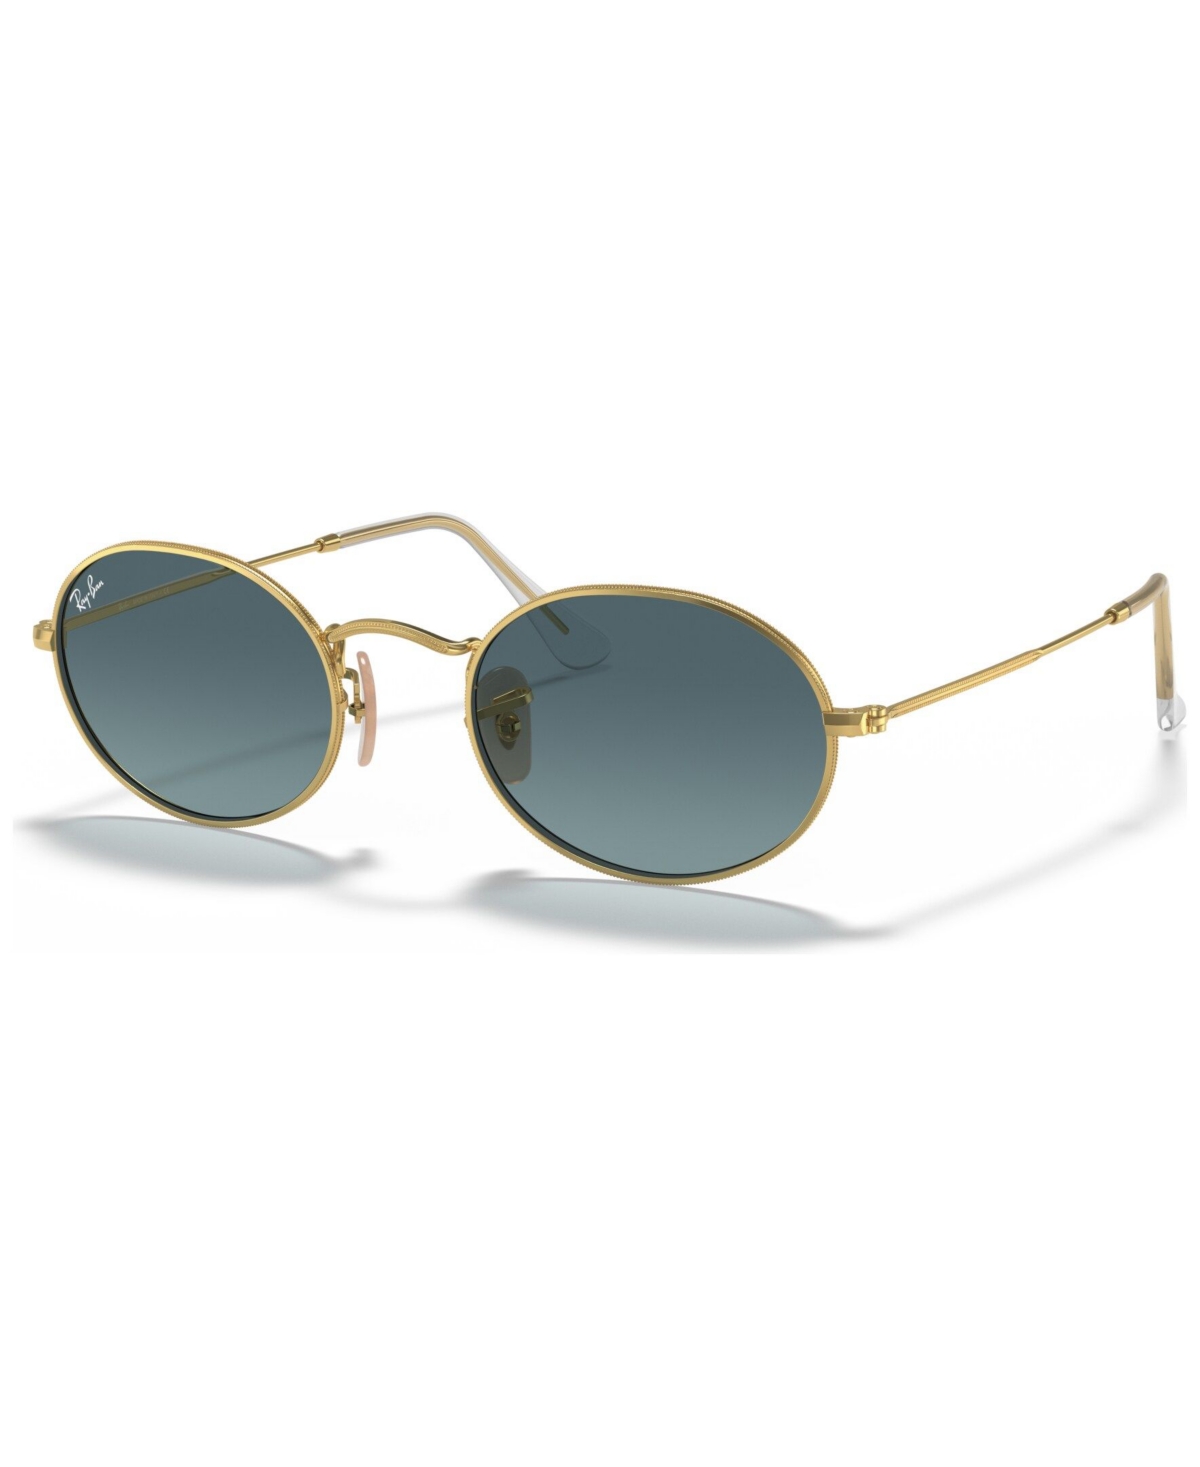 Ray Ban Sunglasses, Rb3547 51 In Gold,blue Gradient Grey